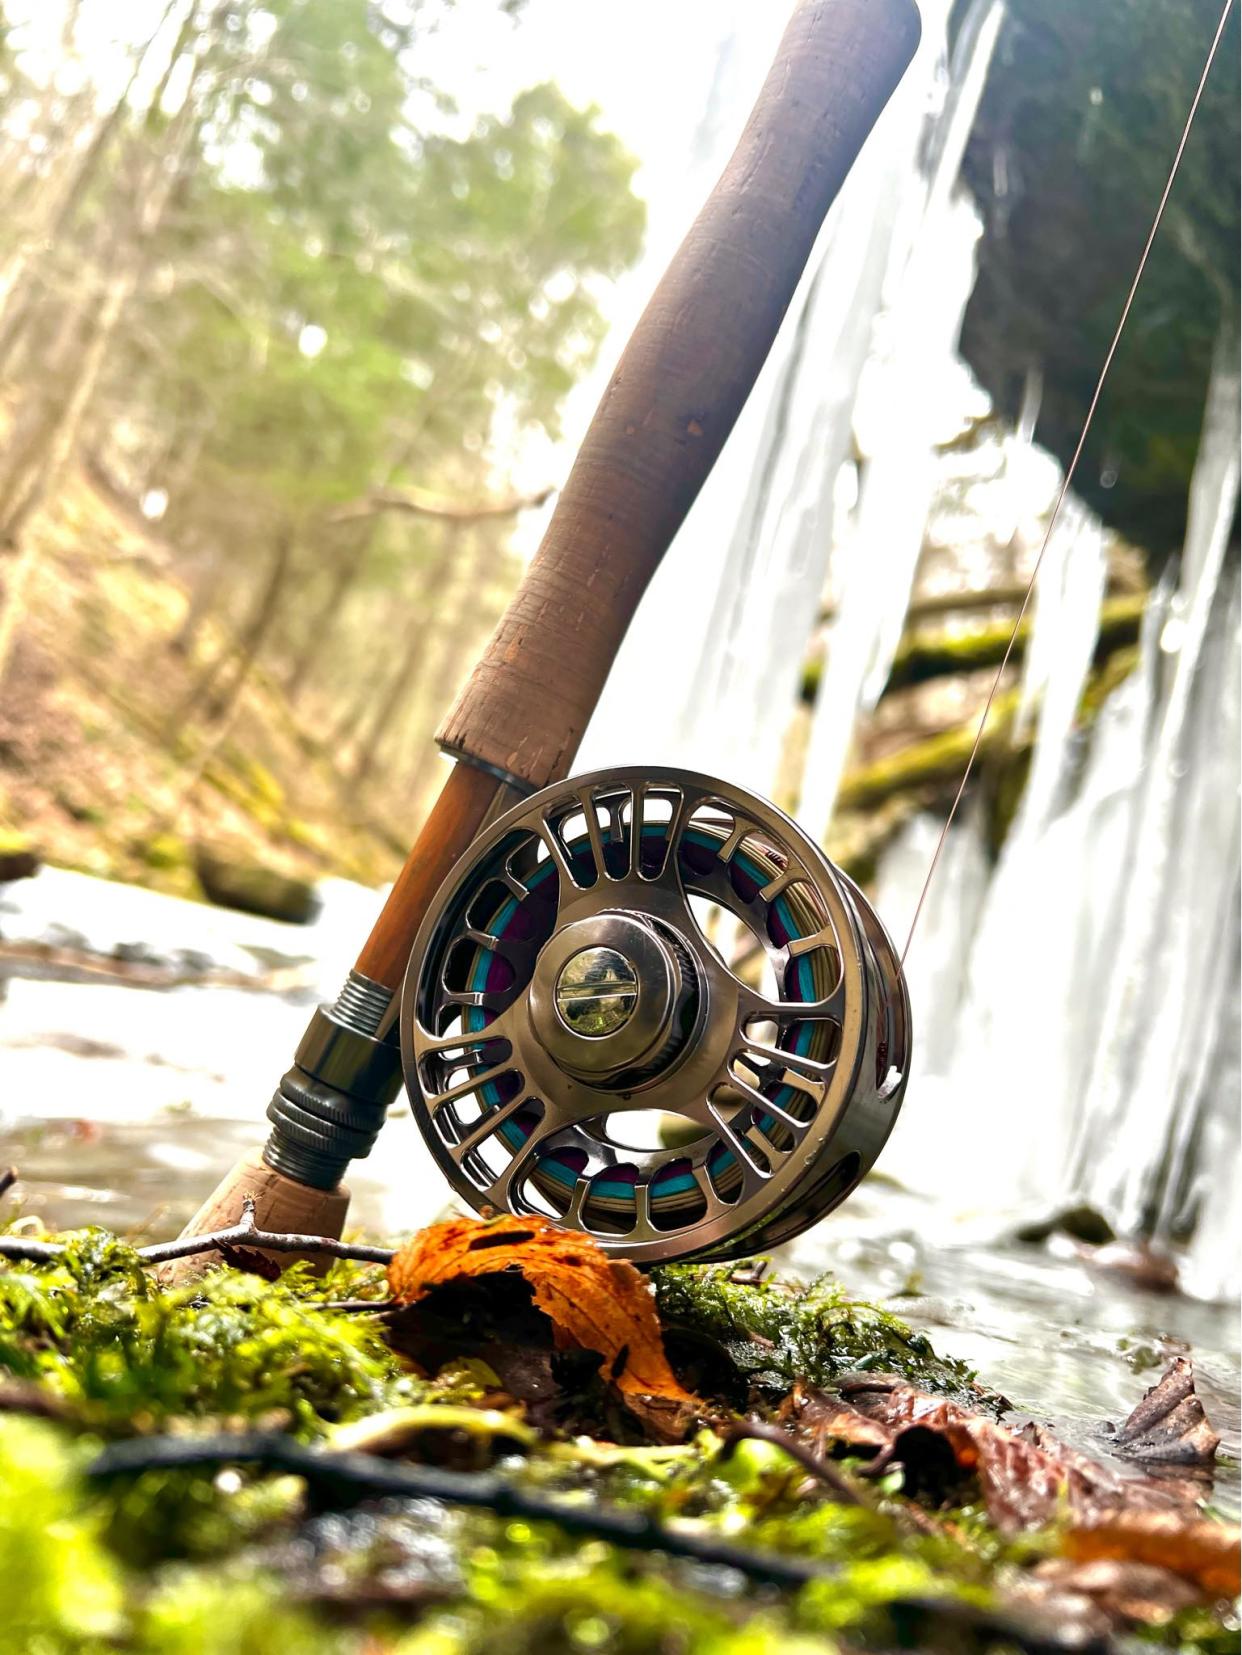 Risen Fly Fishing Shop in Beaver has gifts galore for the fly fishing enthusiast in your life.